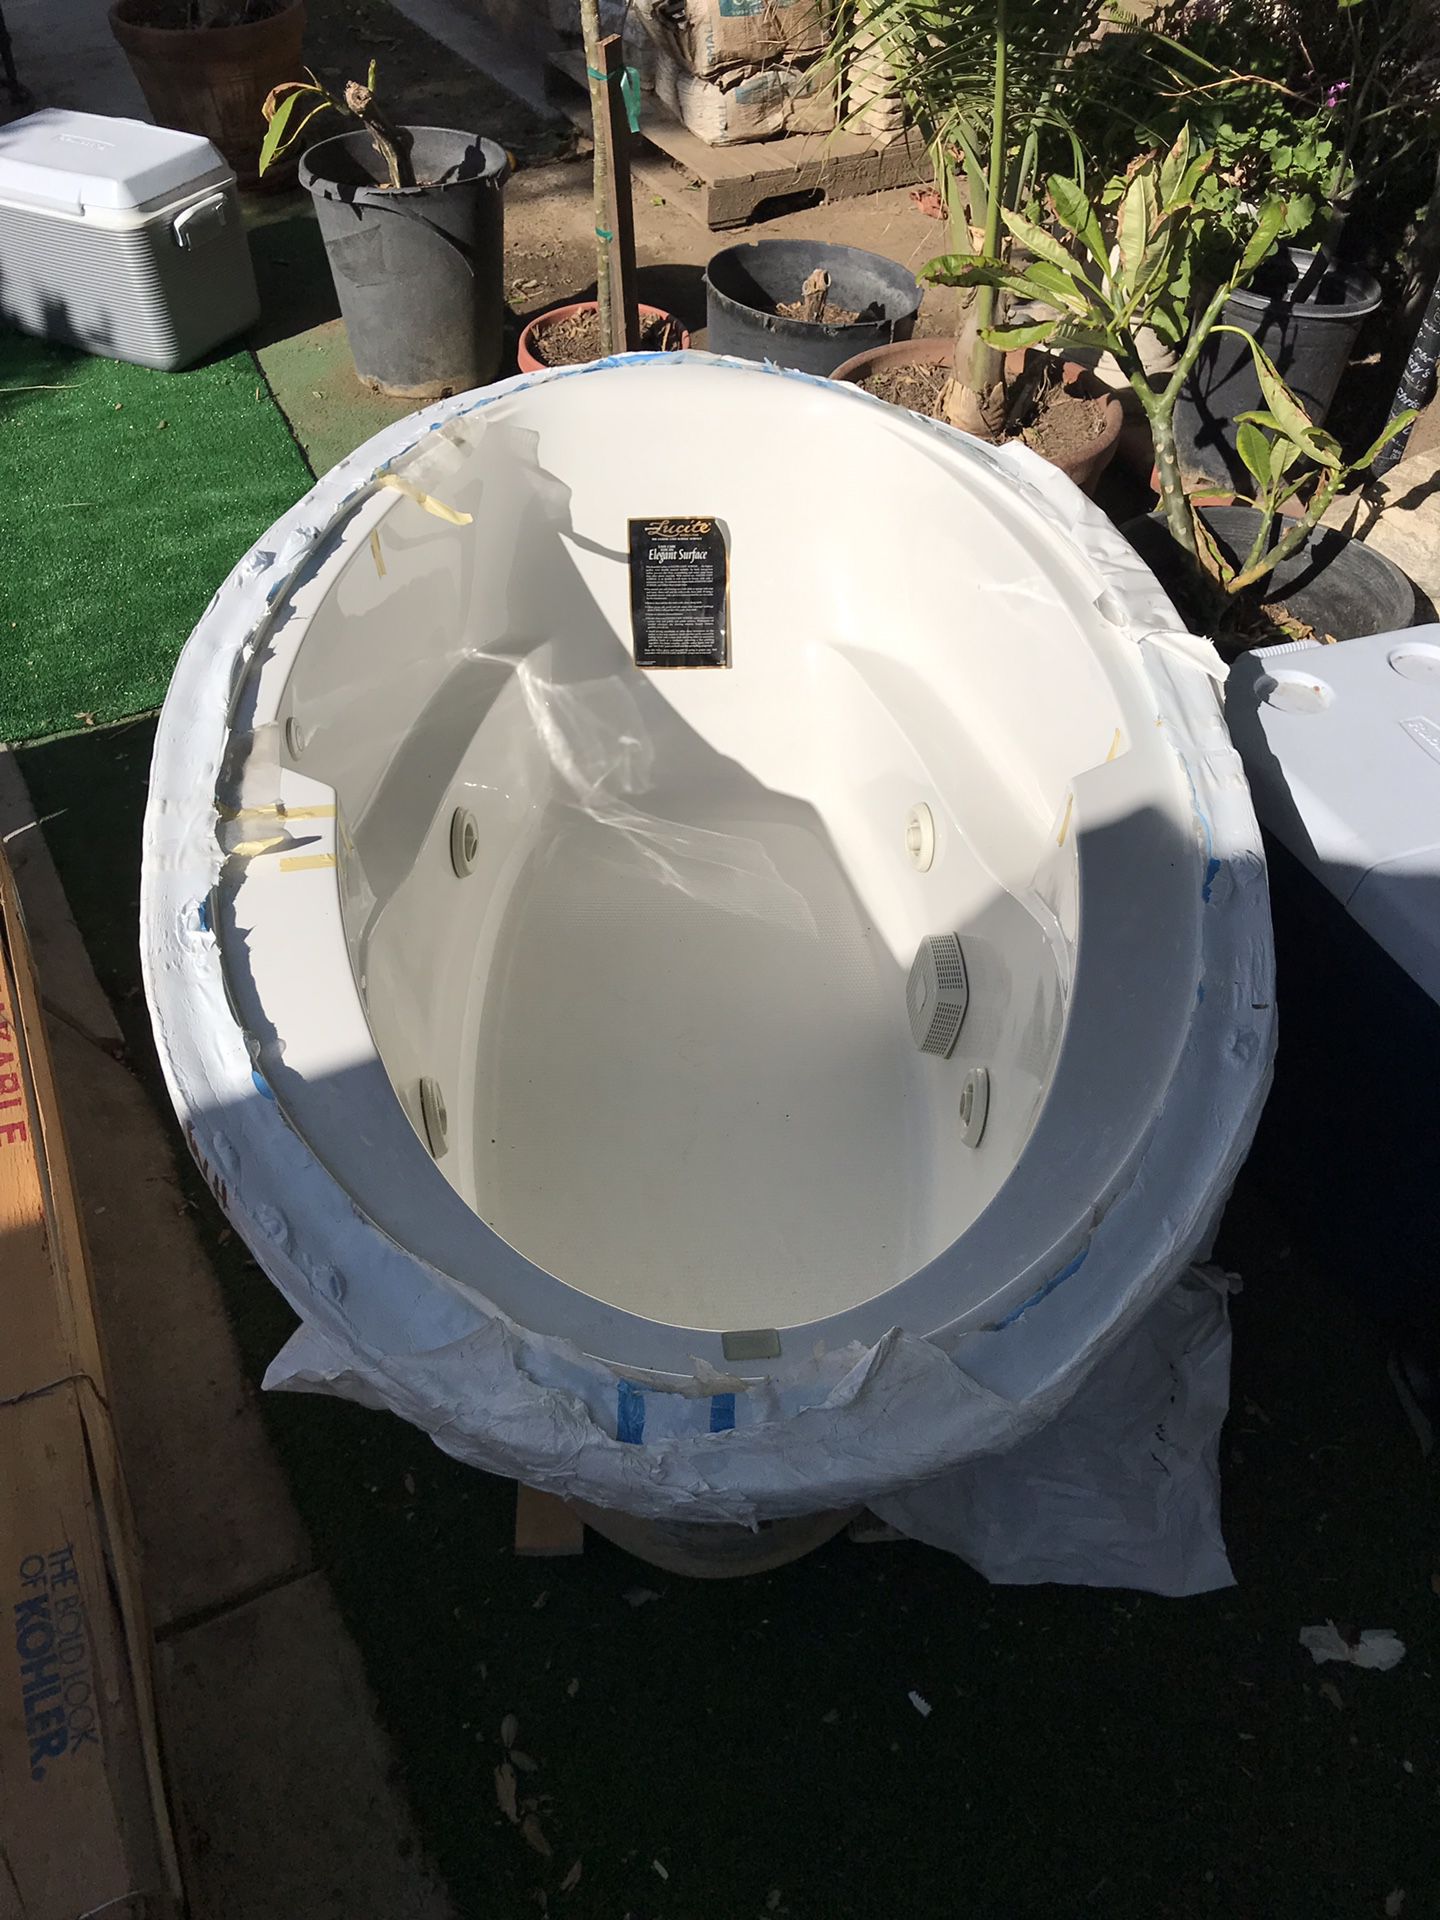 Hot Tub for 1200 or OBO